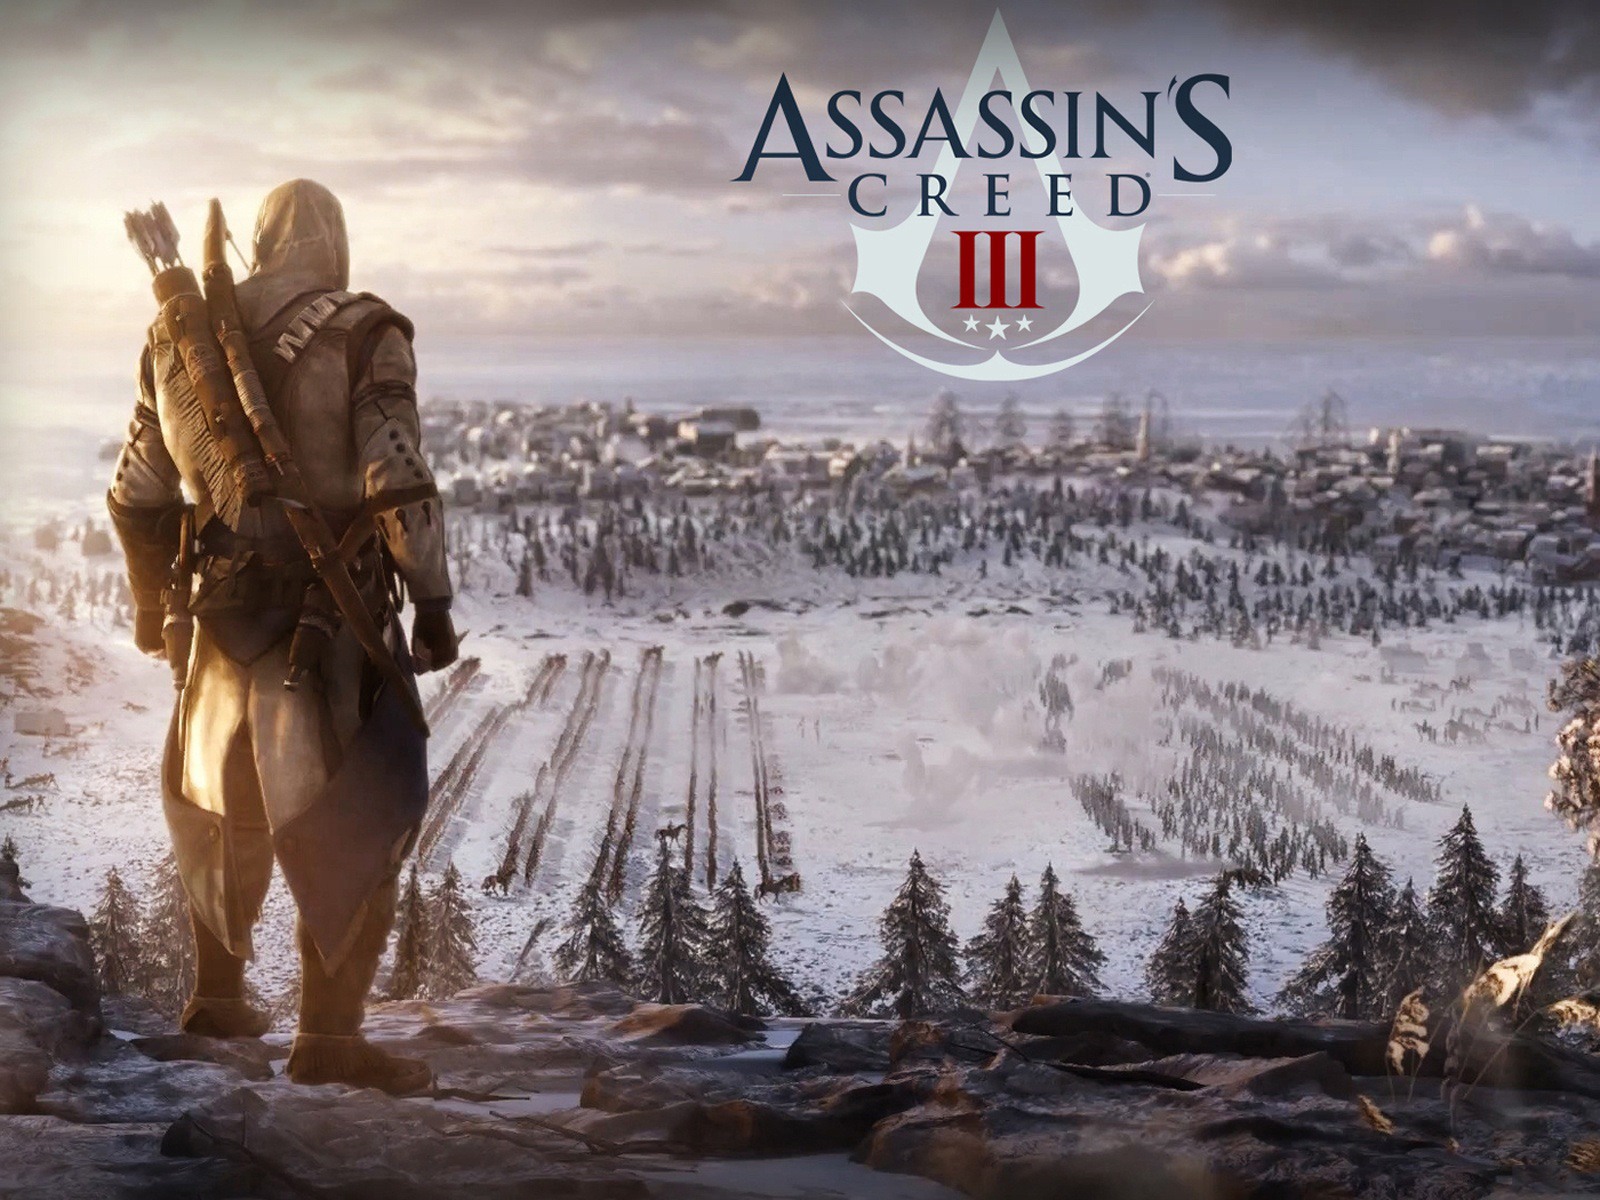 Assassin's Creed 3 HD wallpapers #17 - 1600x1200